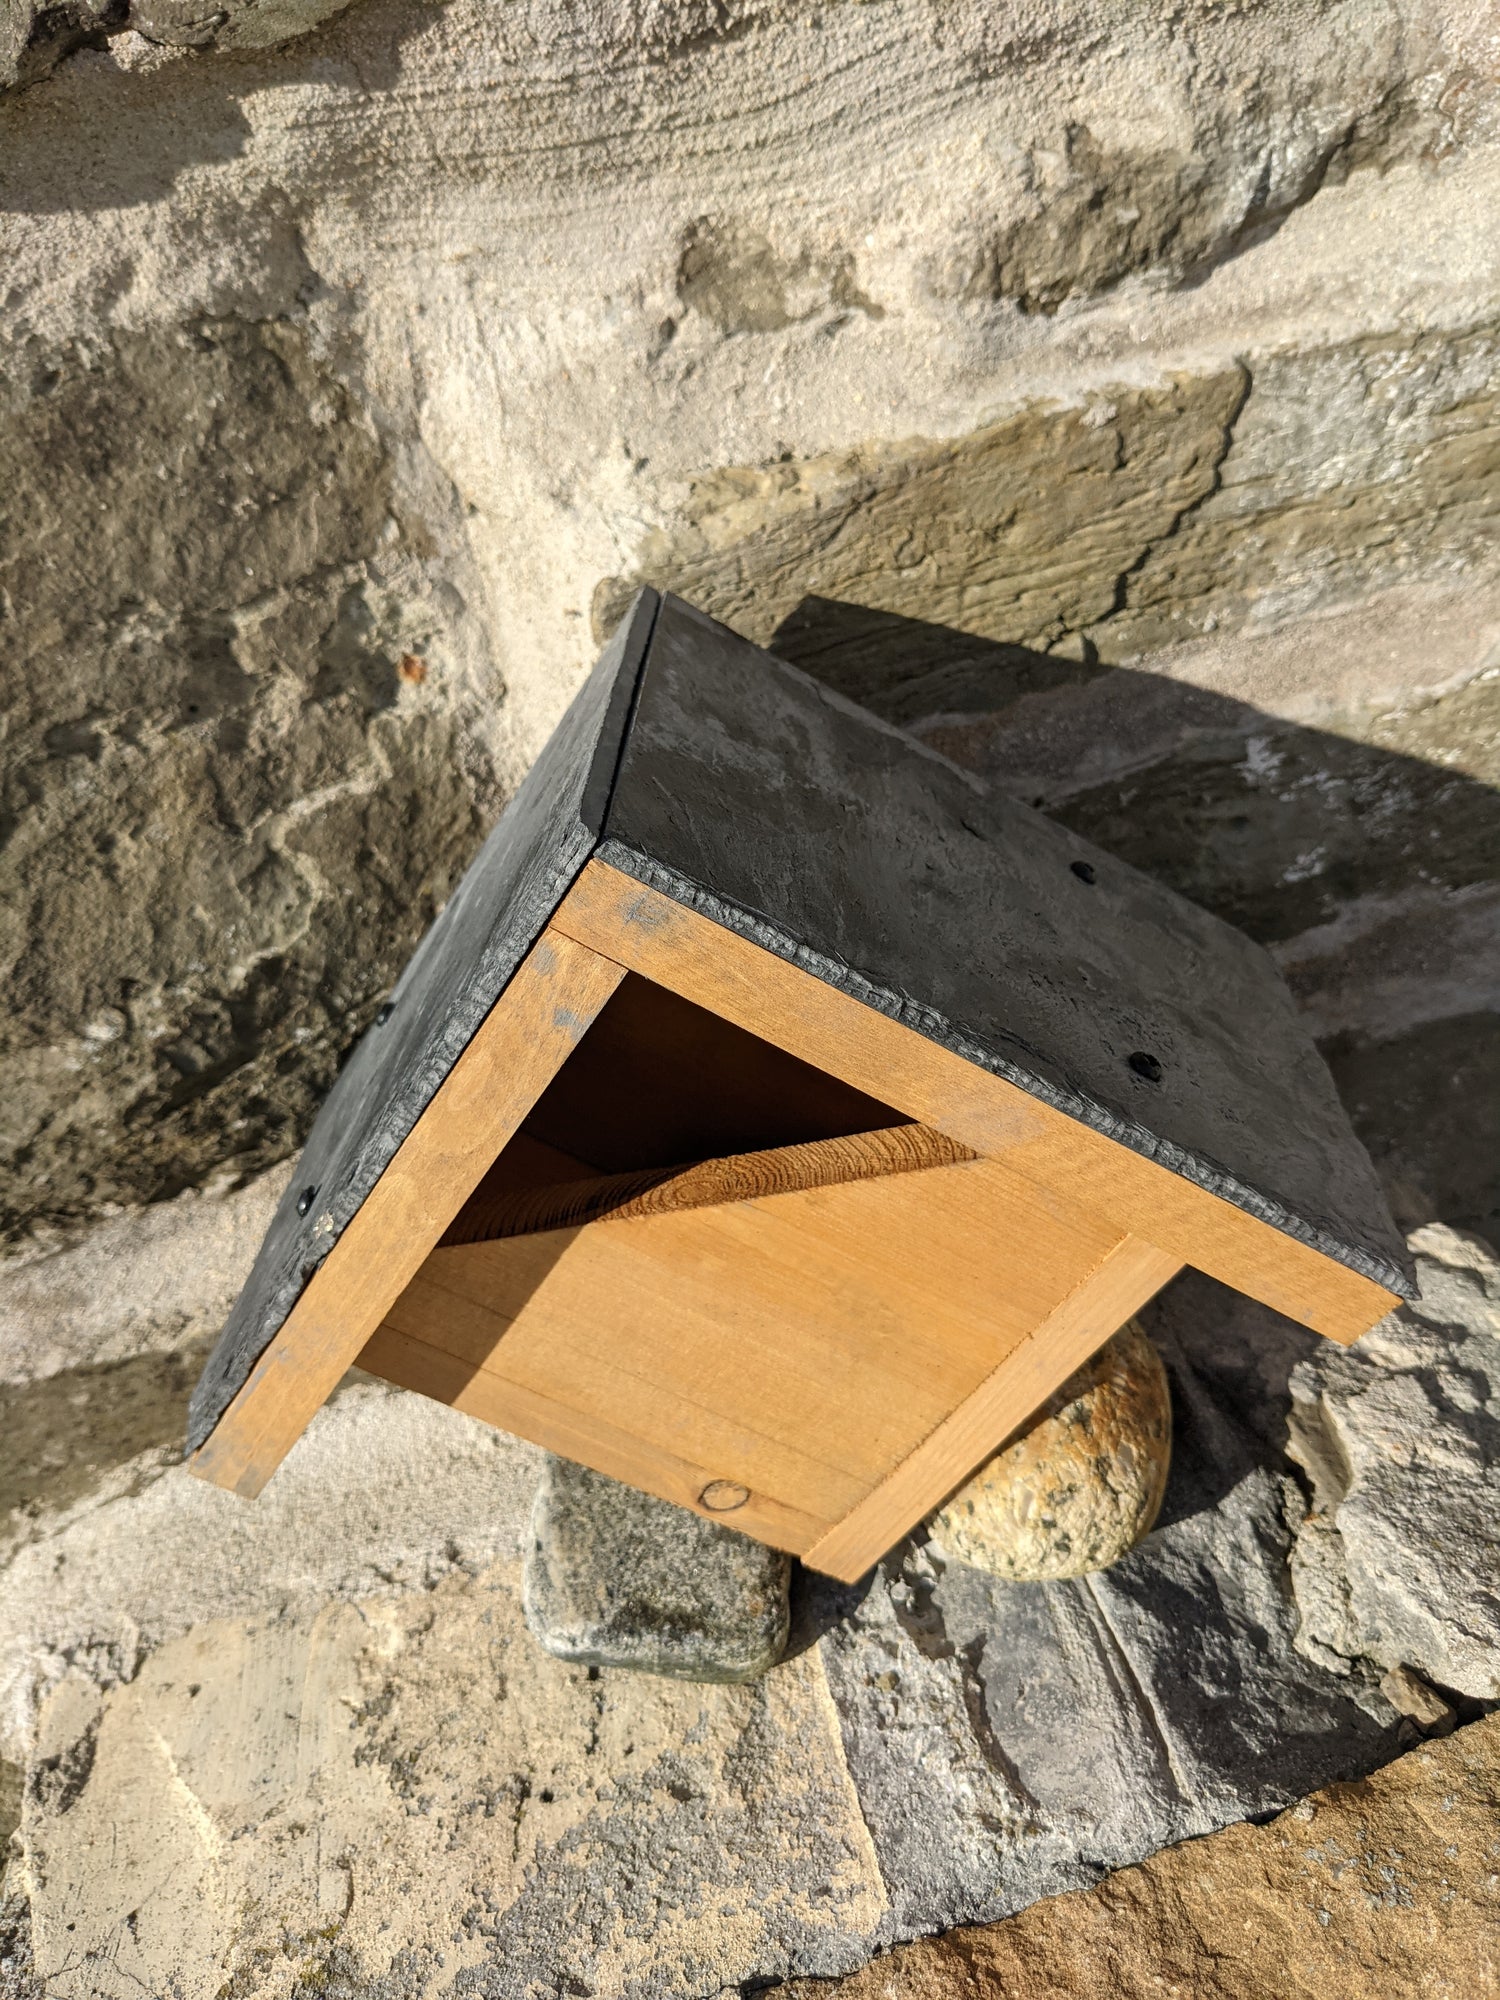 Johnston and Jeff Robin Nest box as viewed from above